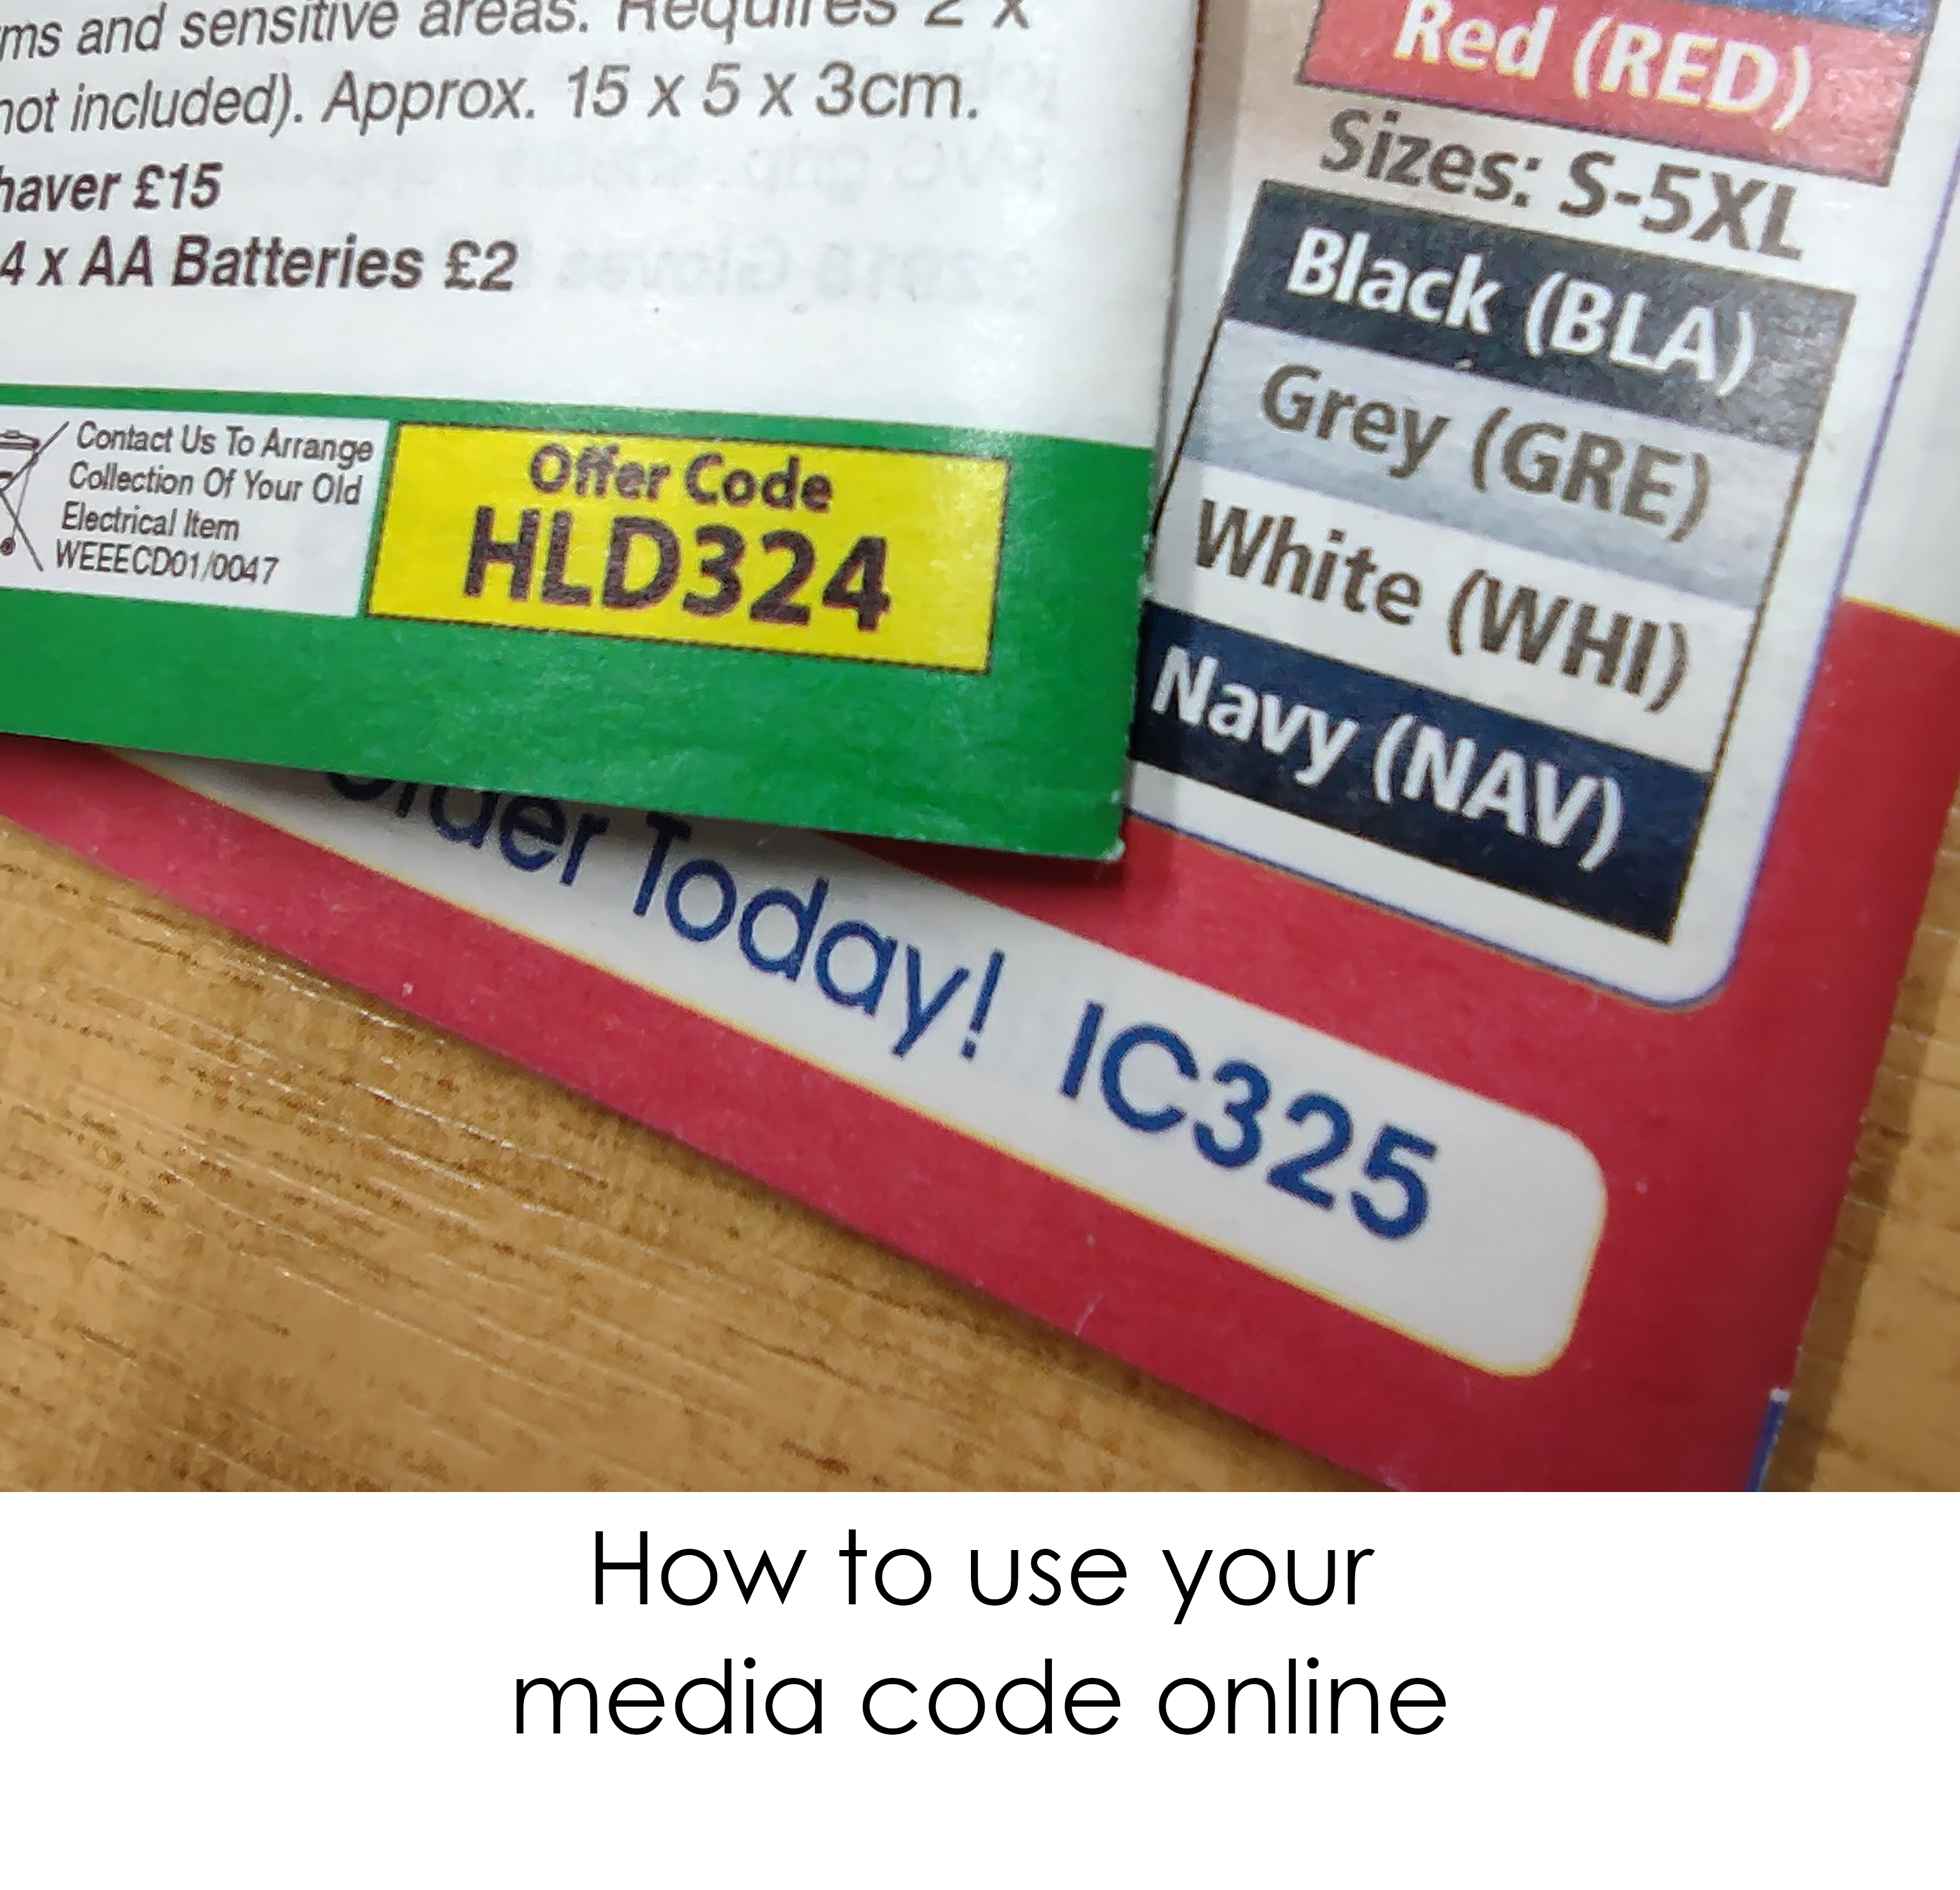 Reverse of catalogue showing media code